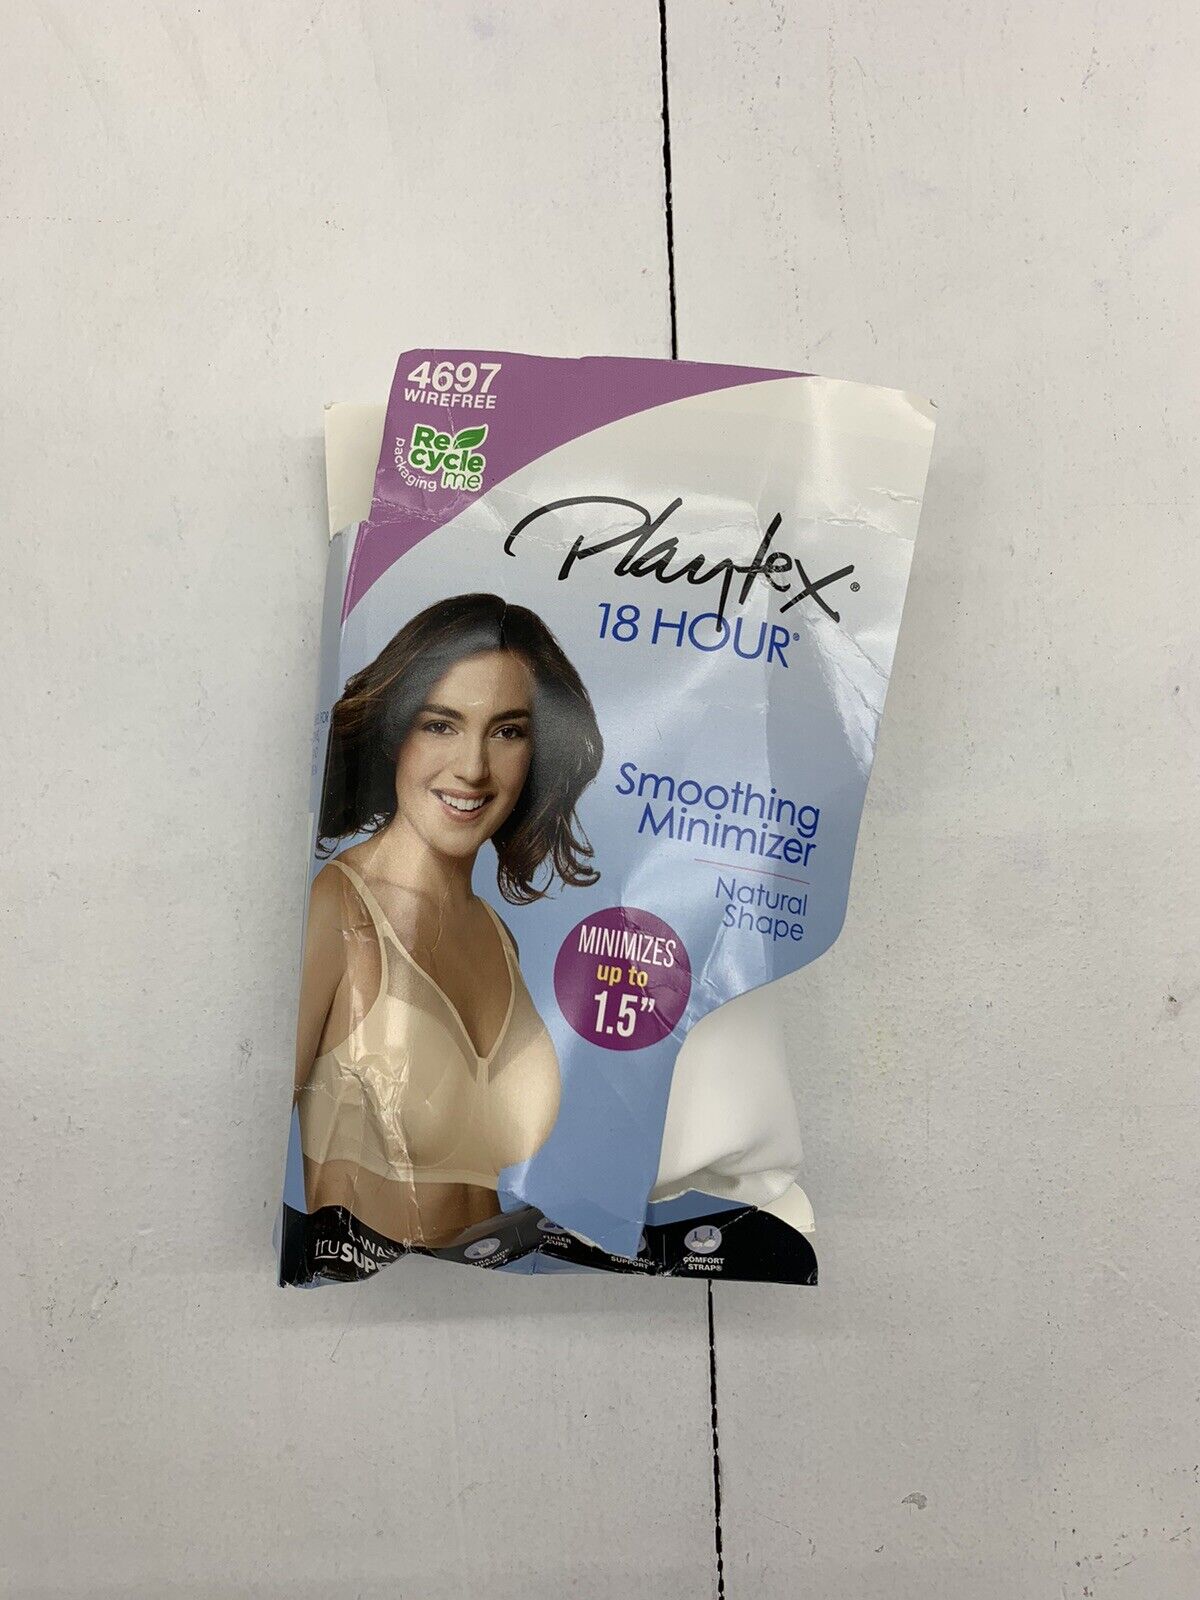 4697 Playtex 18 Hour Smoothing Minimizer Wirefree - White size 44DD